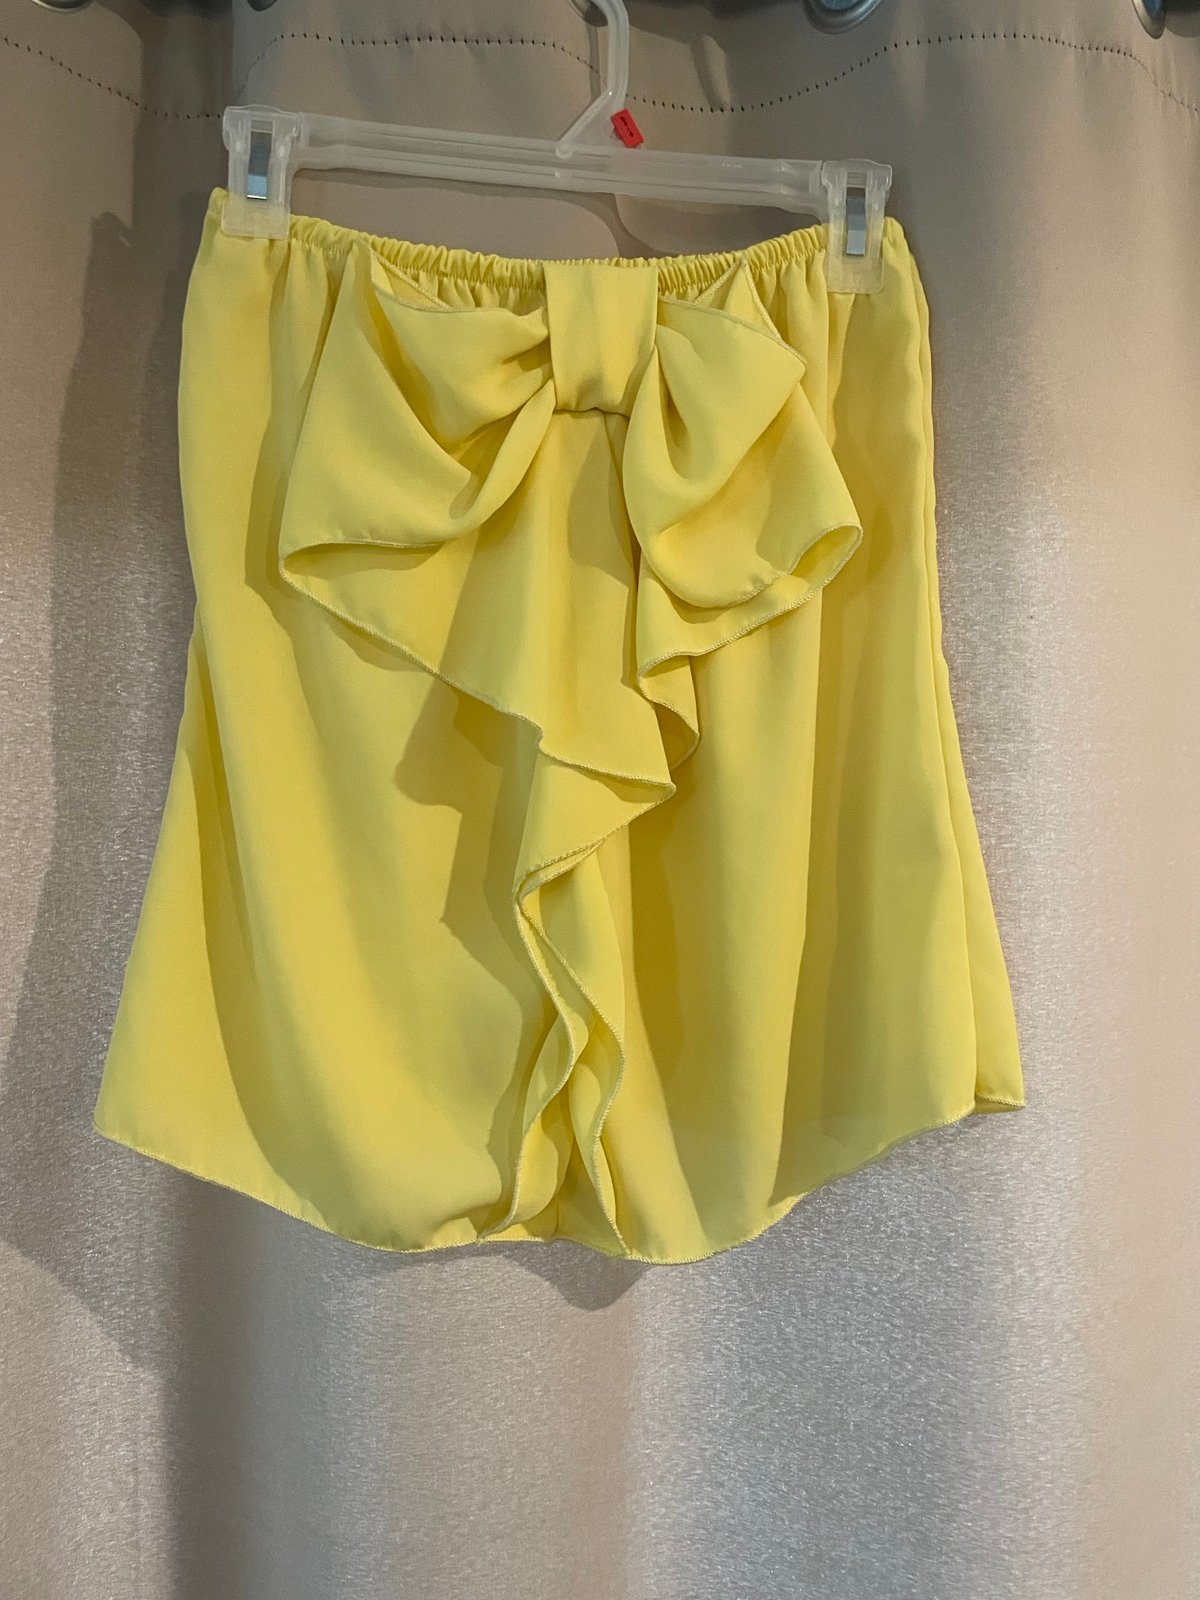 Affordable Women’s Yellow Strapless Blouse PlSunu4x8 on